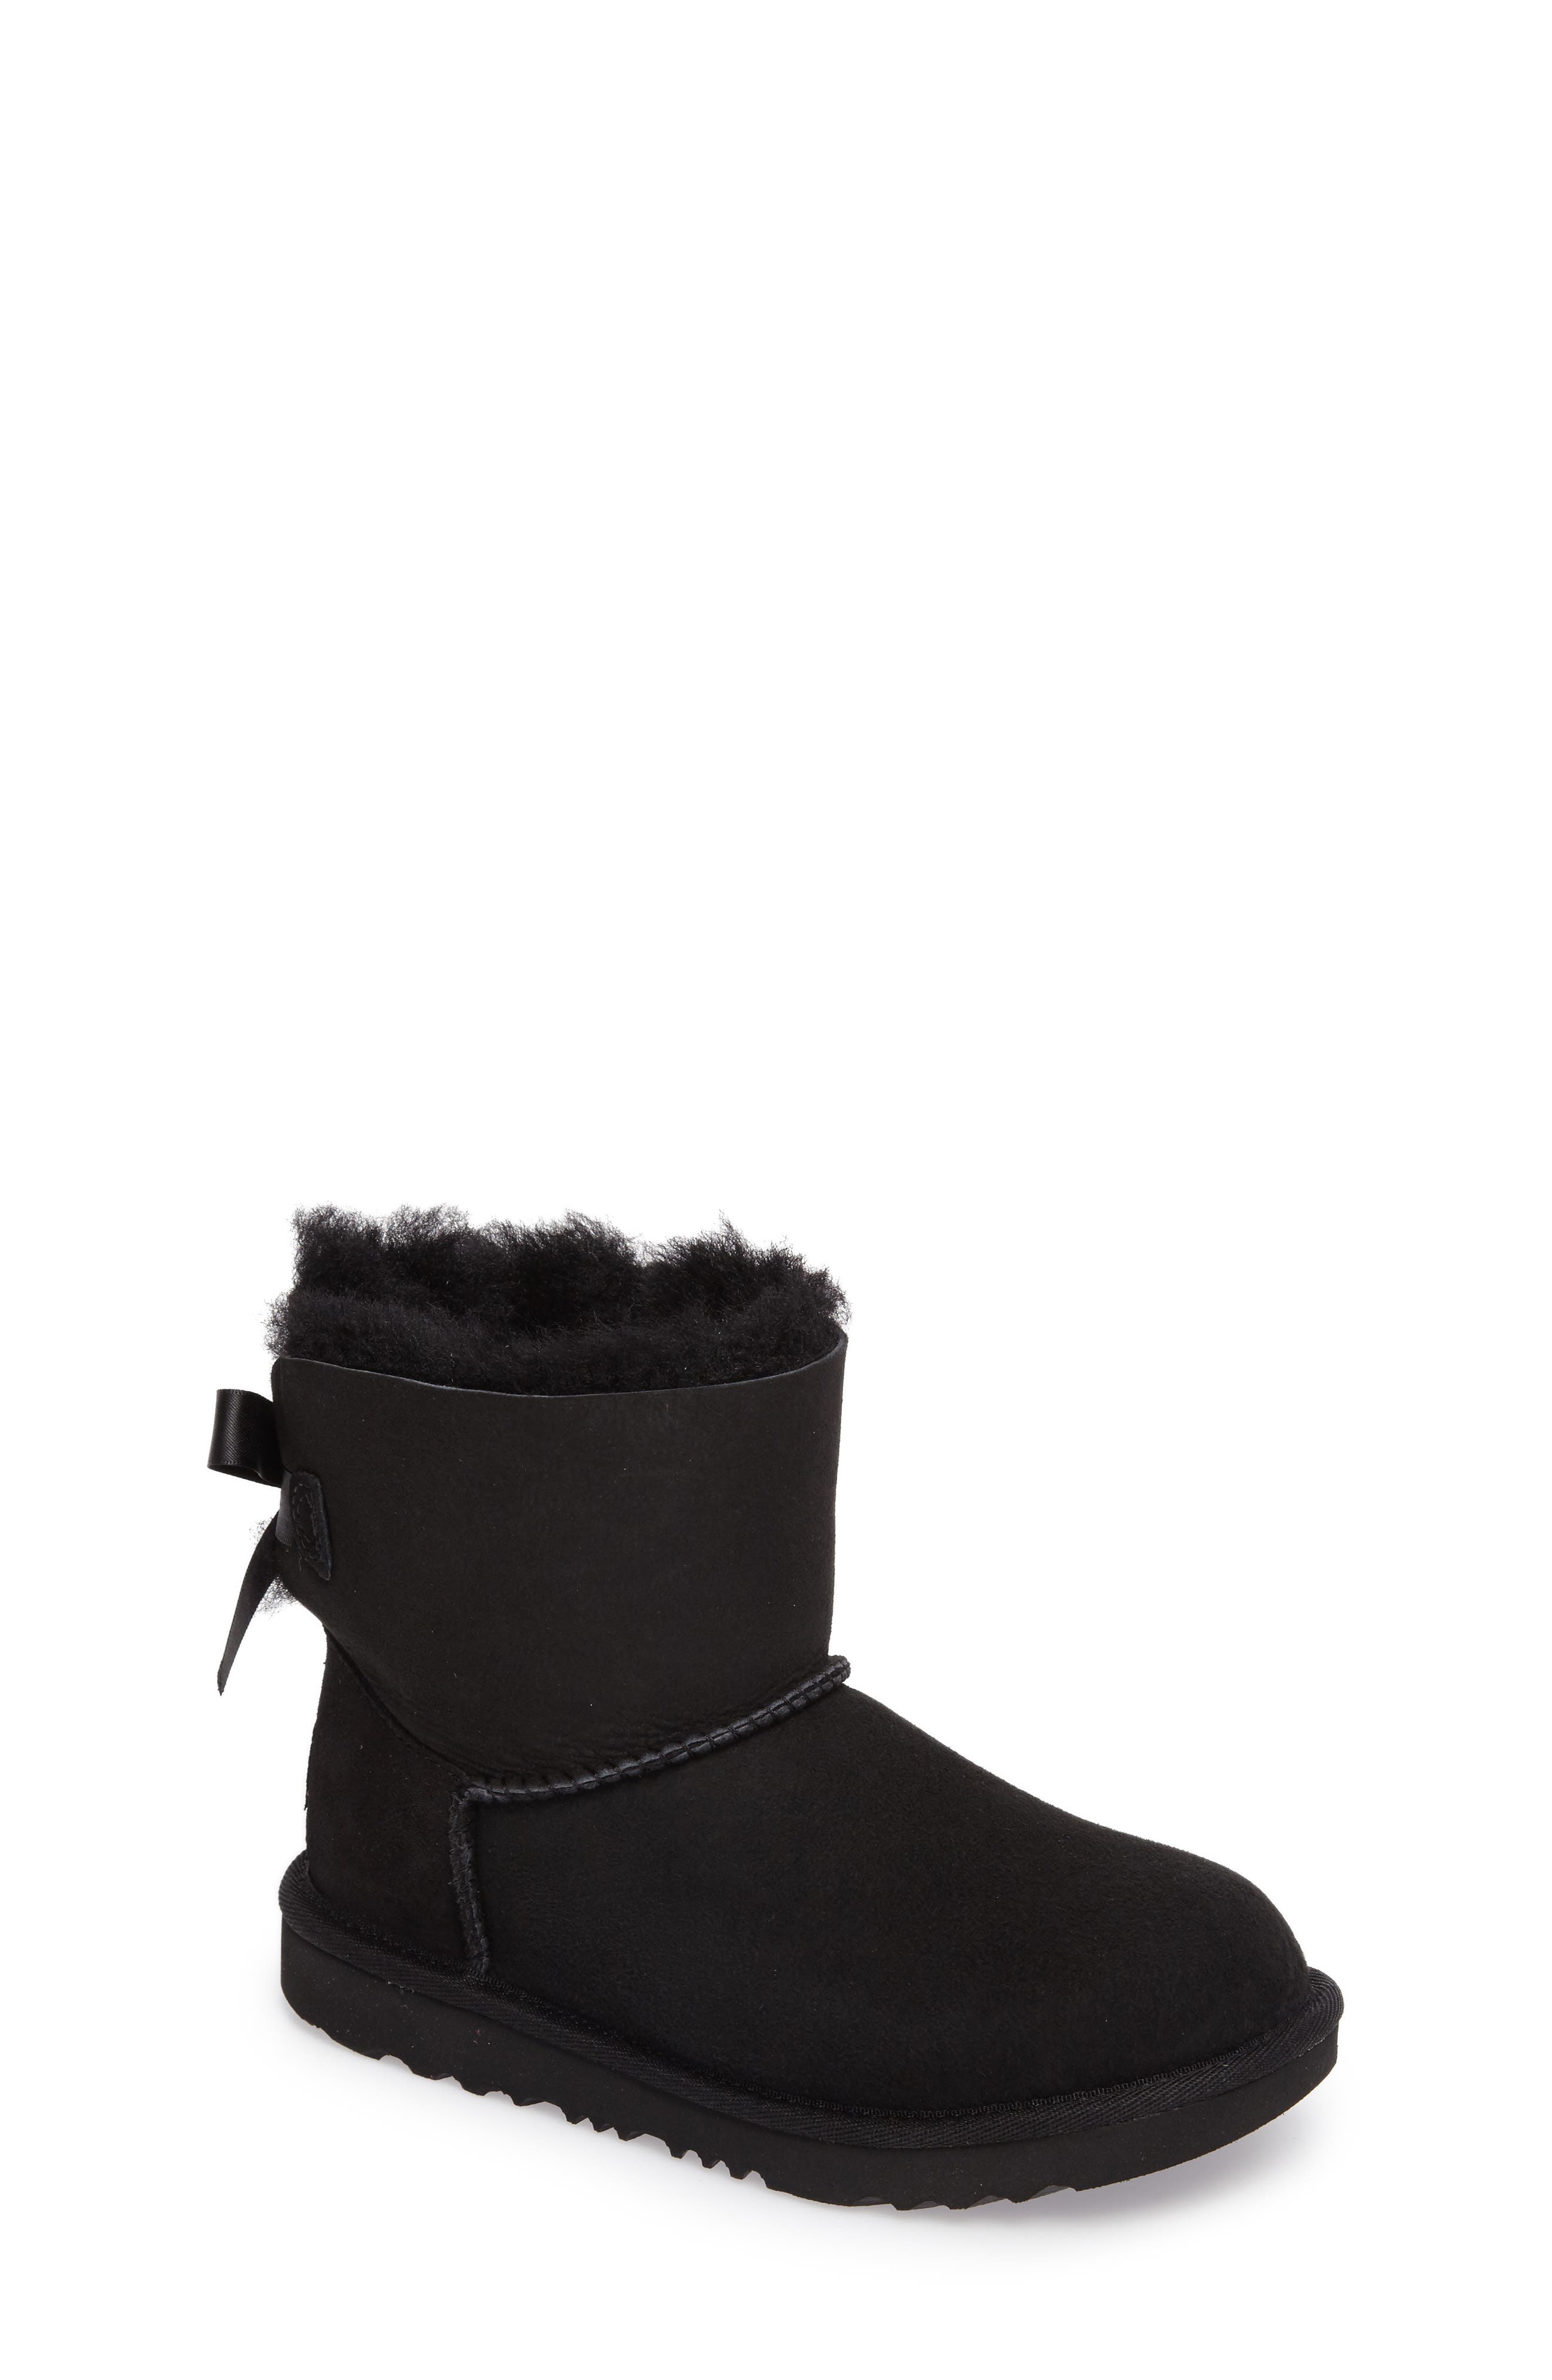 cyber monday ugg bailey bow